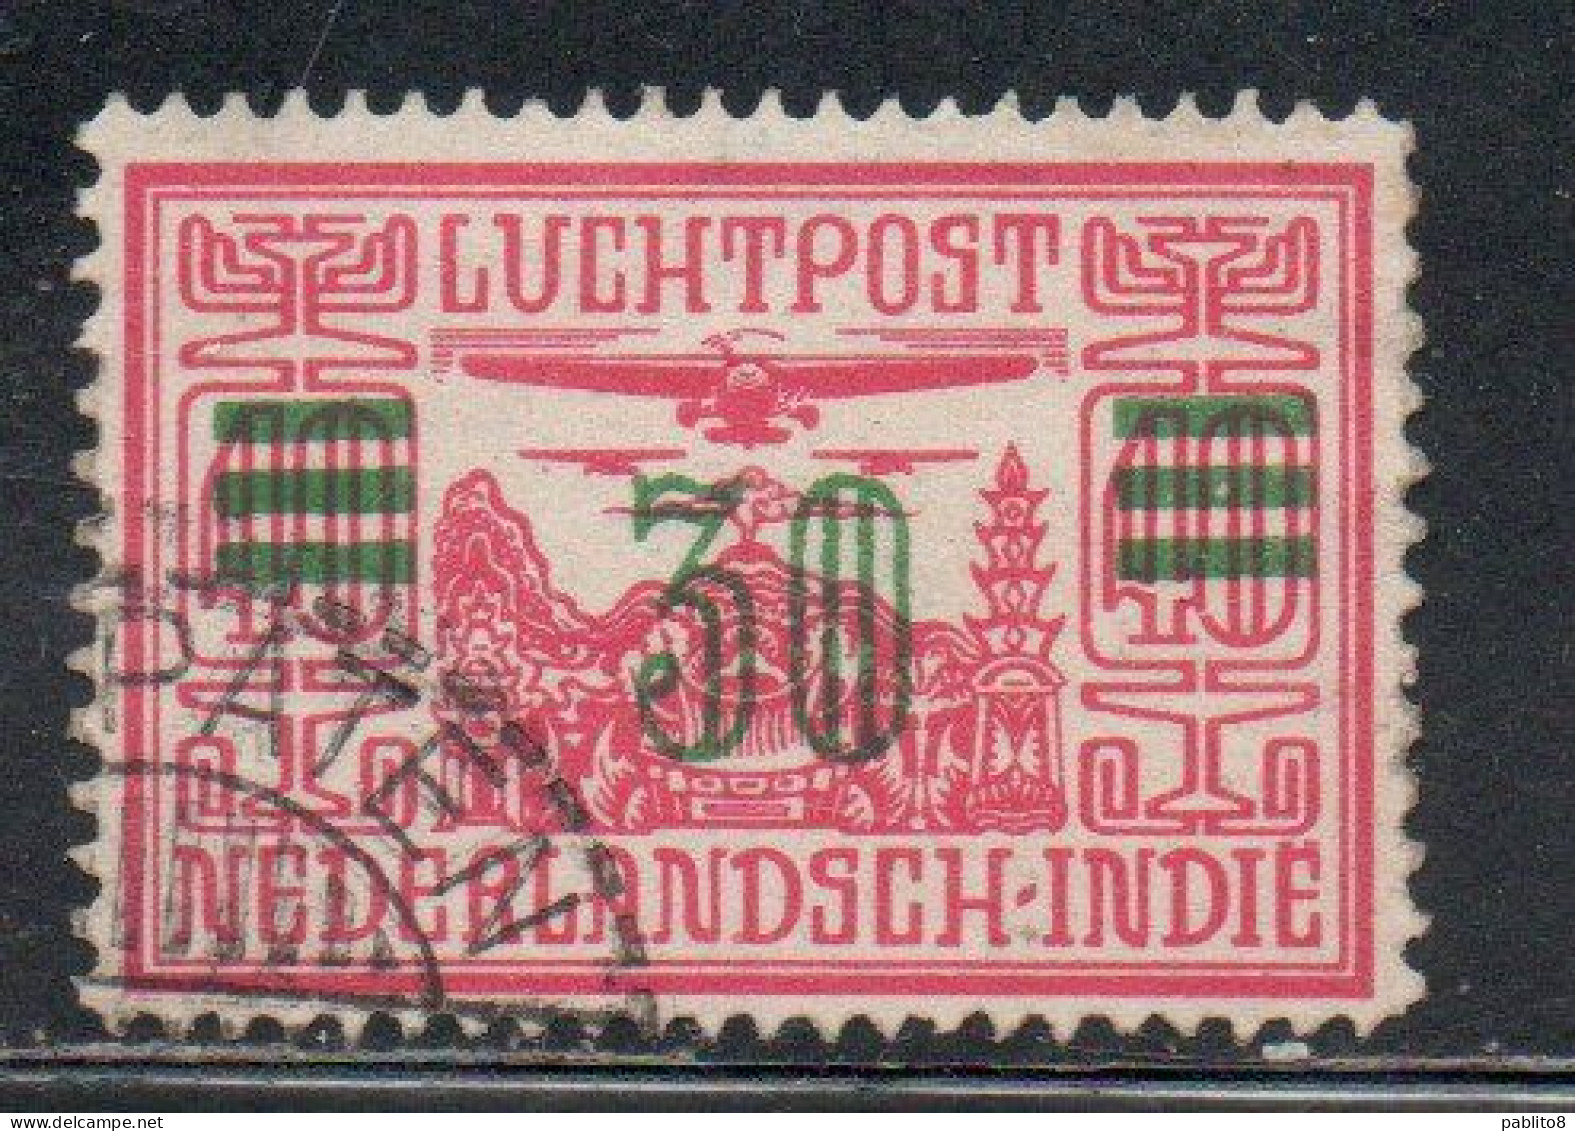 DUTCH INDIA INDIE INDE NEDERLANDS HOLLAND OLANDESE OLANDESI INDIES 1930 1932 AIRMAIL AIR MAIL SURCHARGED 30c On 40c USED - Nederlands-Indië